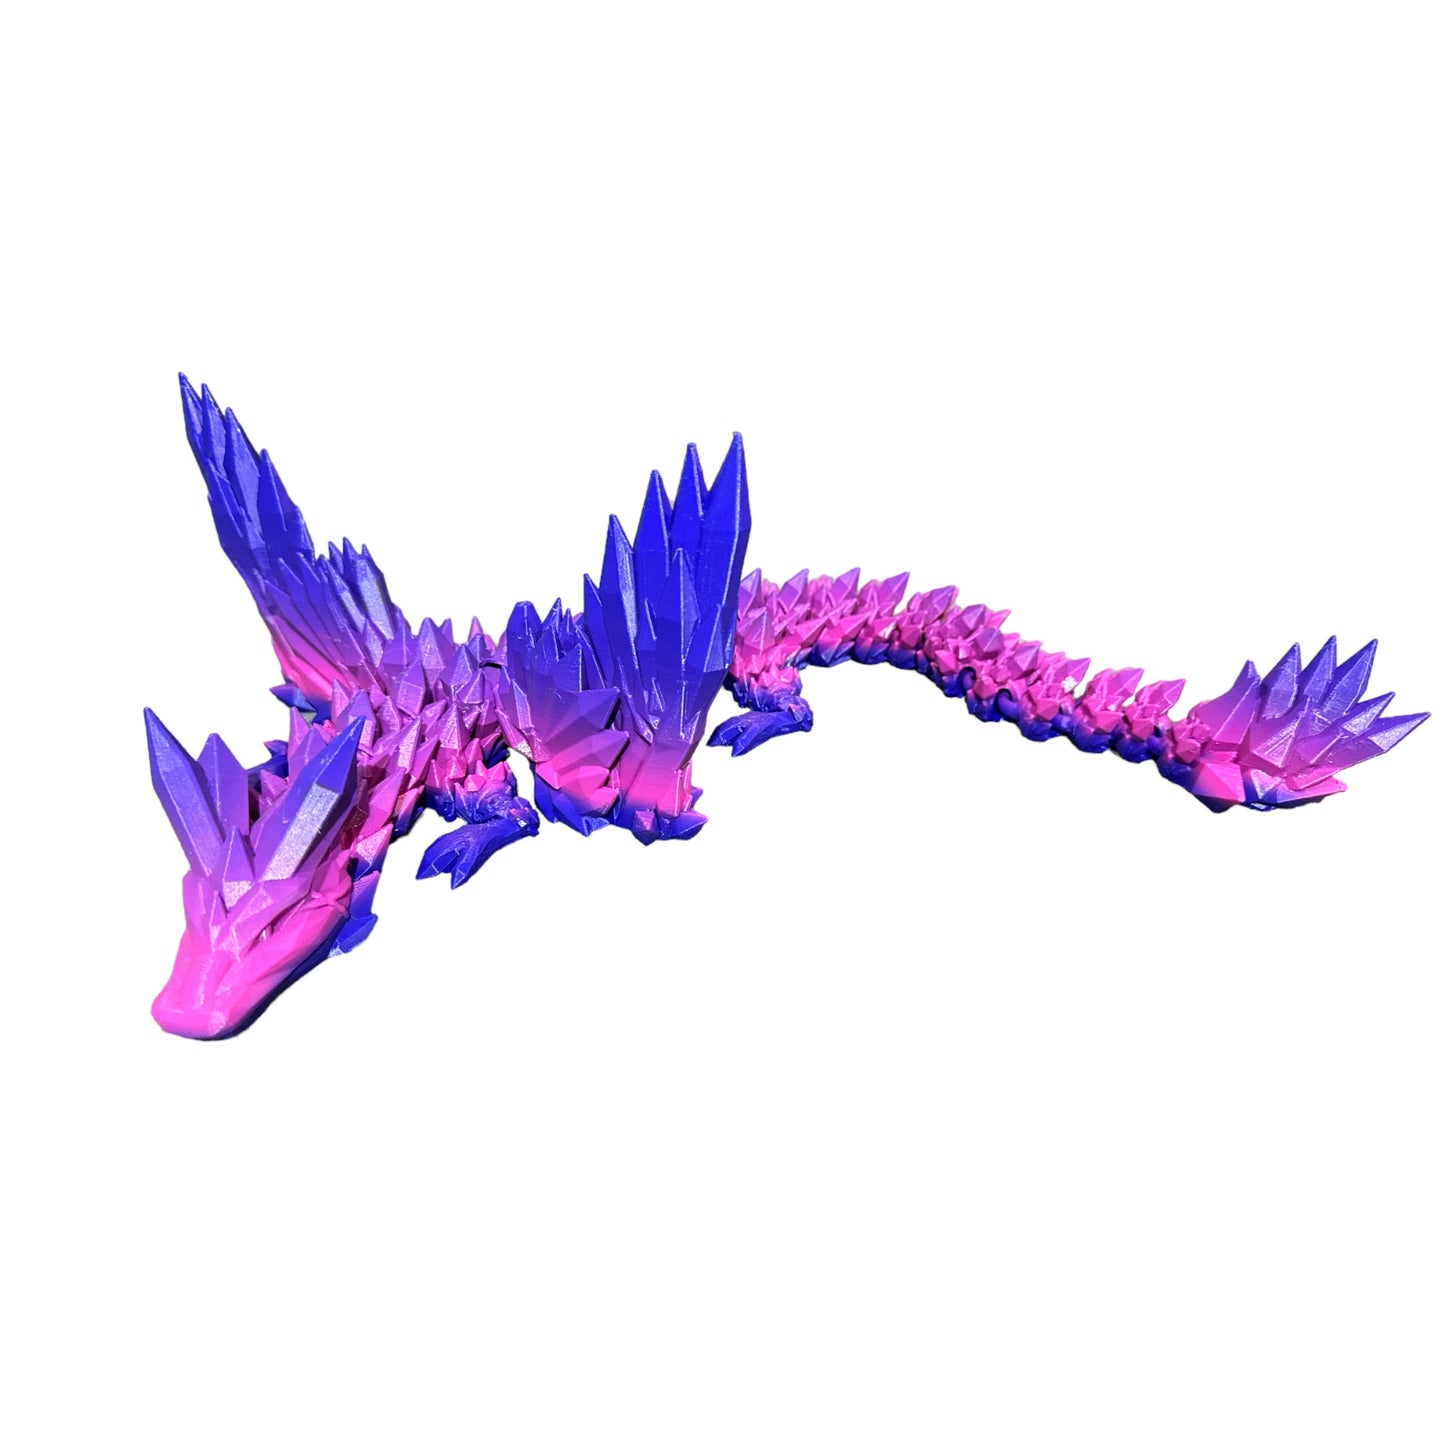 CrystalWing Dragon 3D Printed Articulating Figurine